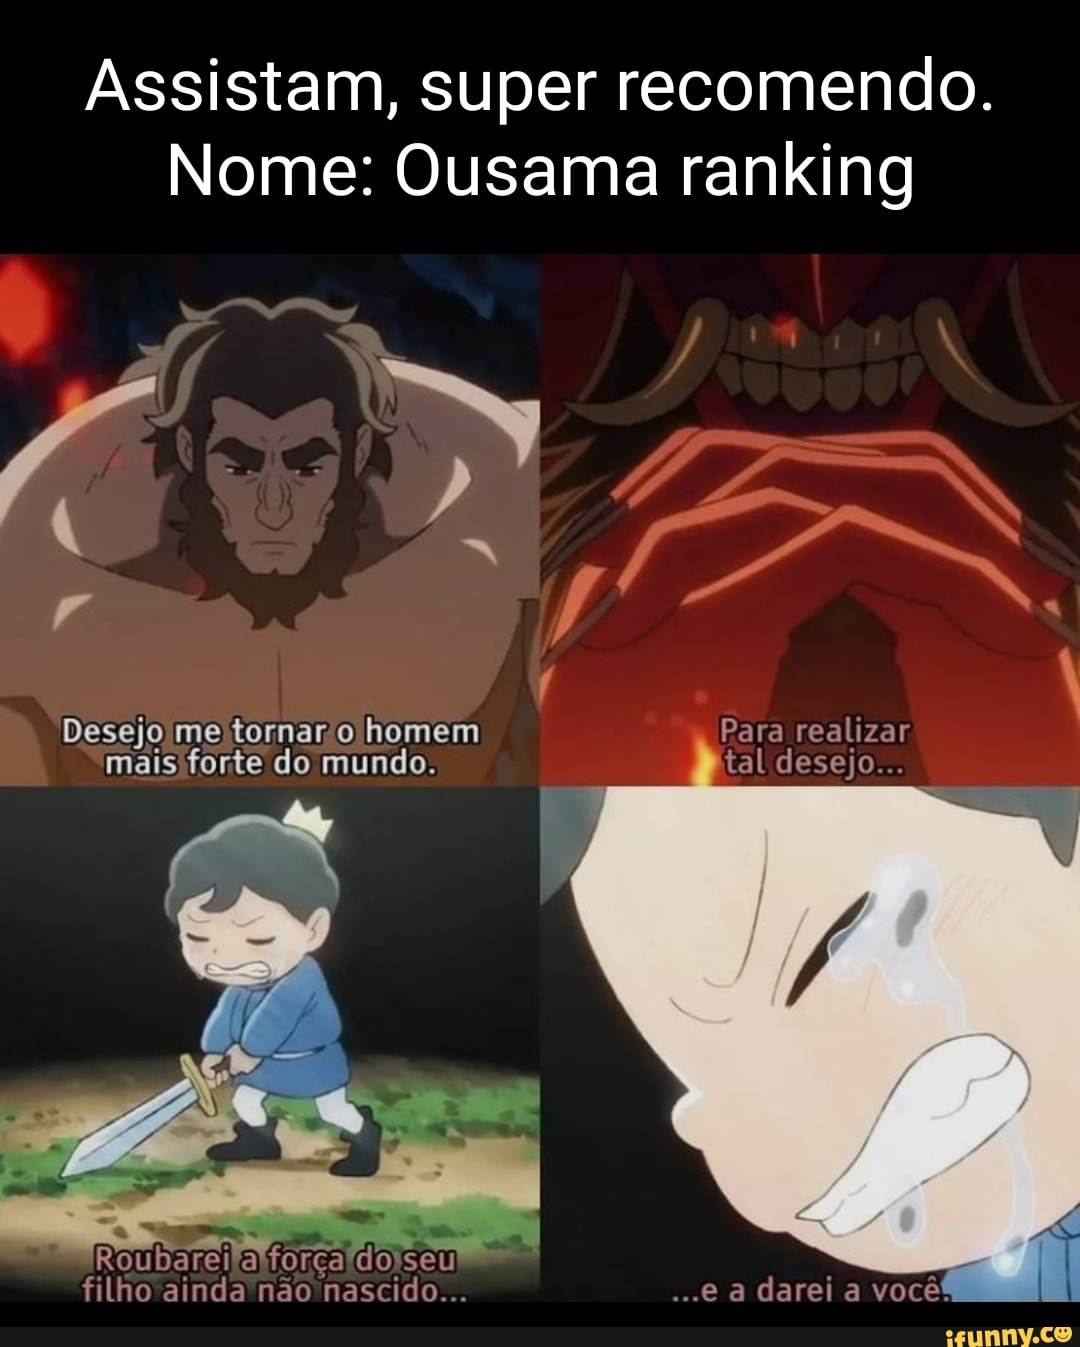 Ousama memes. Best Collection of funny Ousama pictures on iFunny